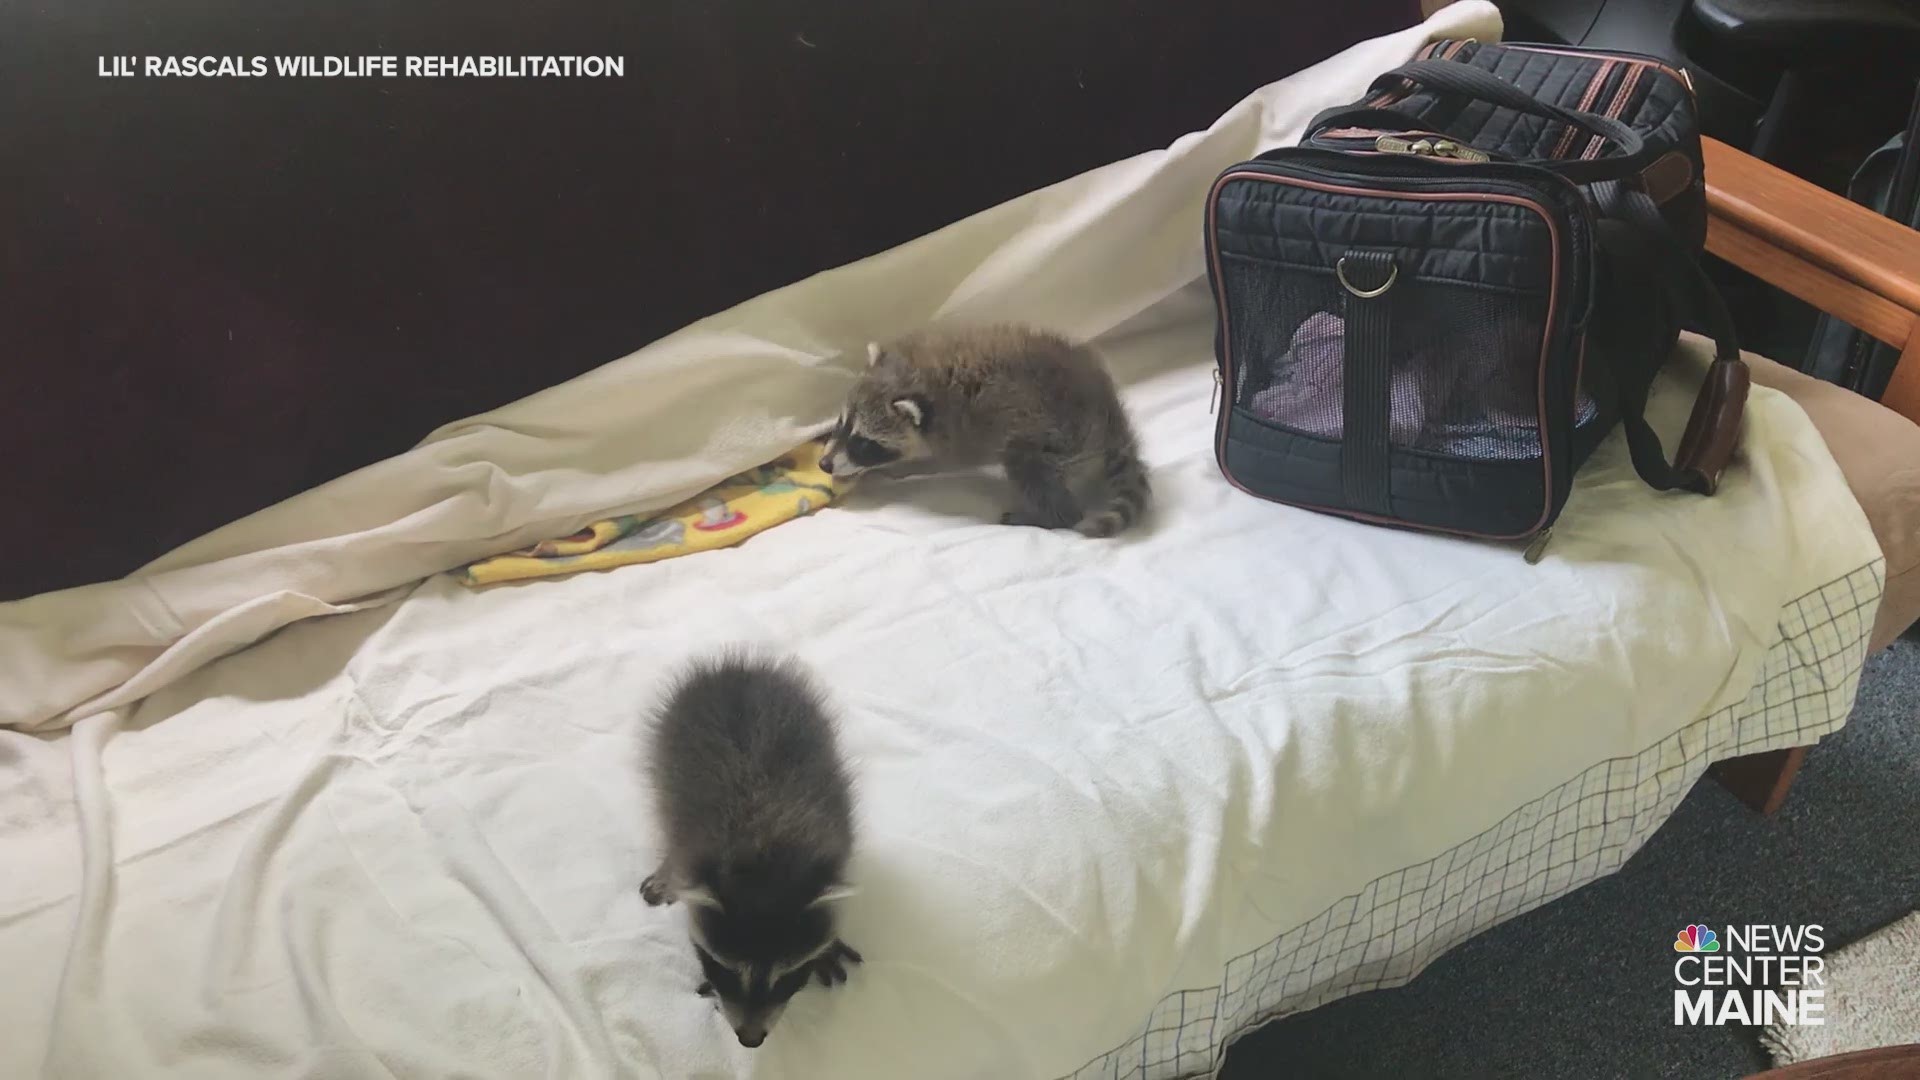 Rescued baby raccoons 'Luke' and 'Leia' at Lil' Rascals Wildlife Rehabilitation